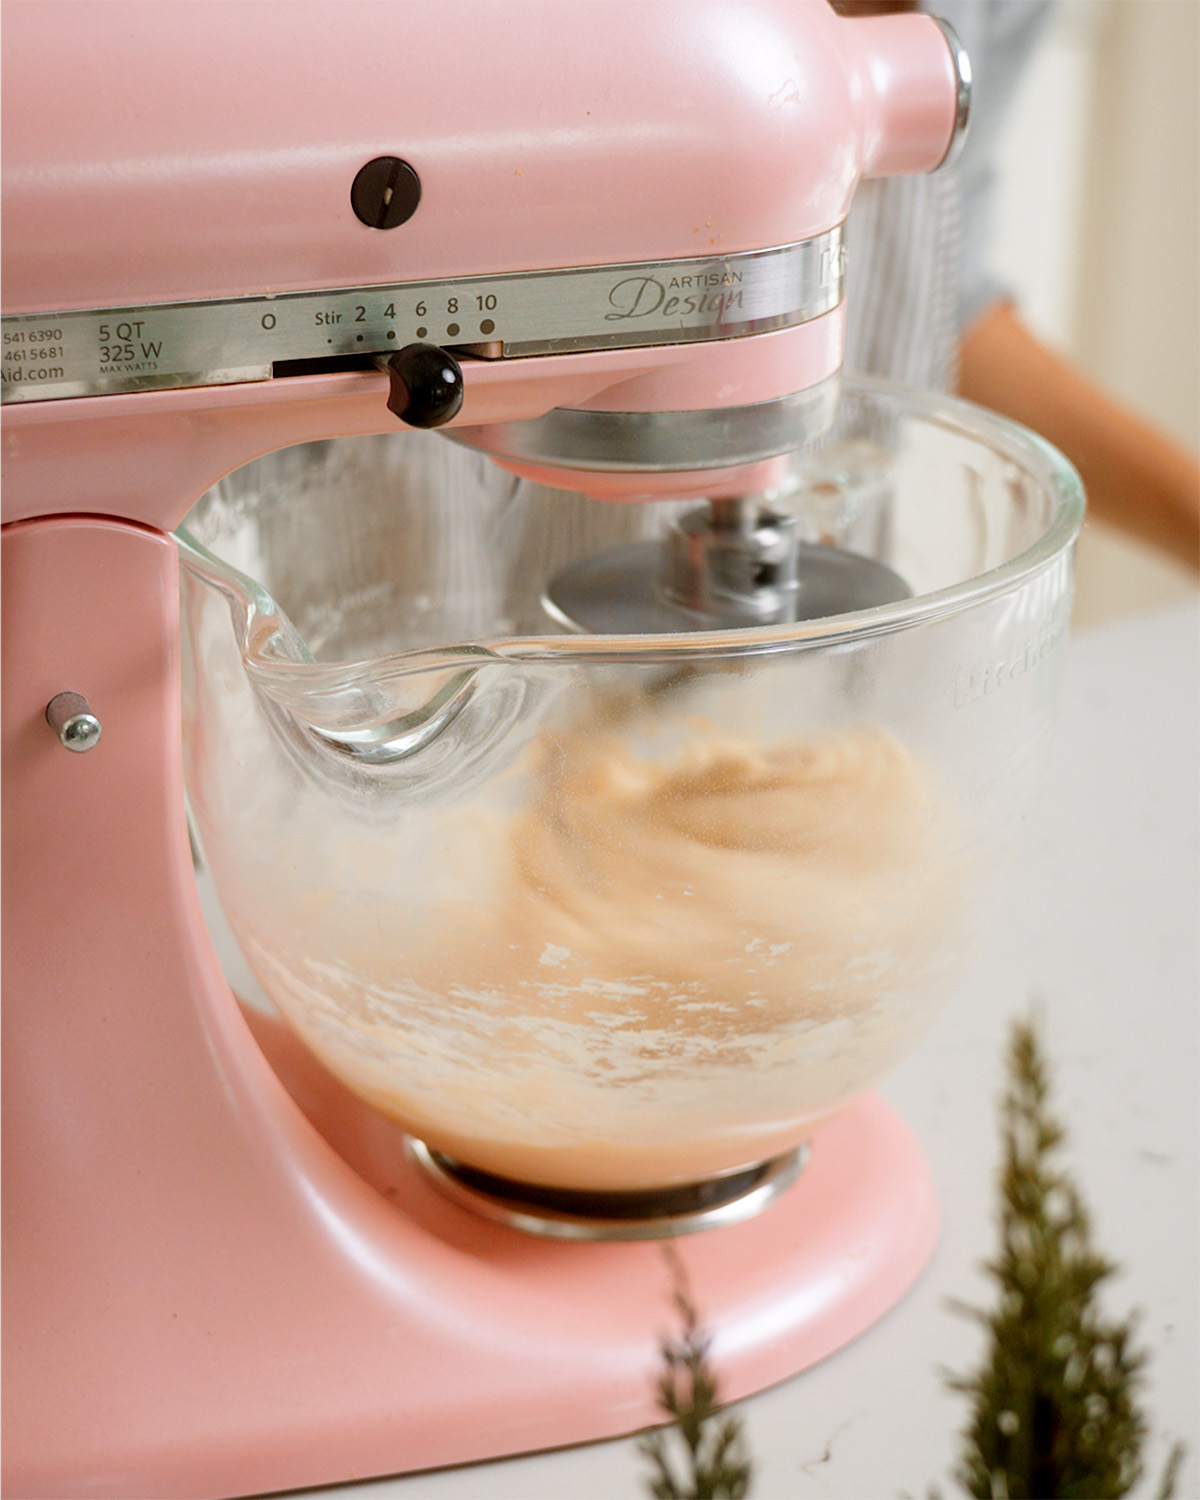 Mixing together the dough in a stand mixer.